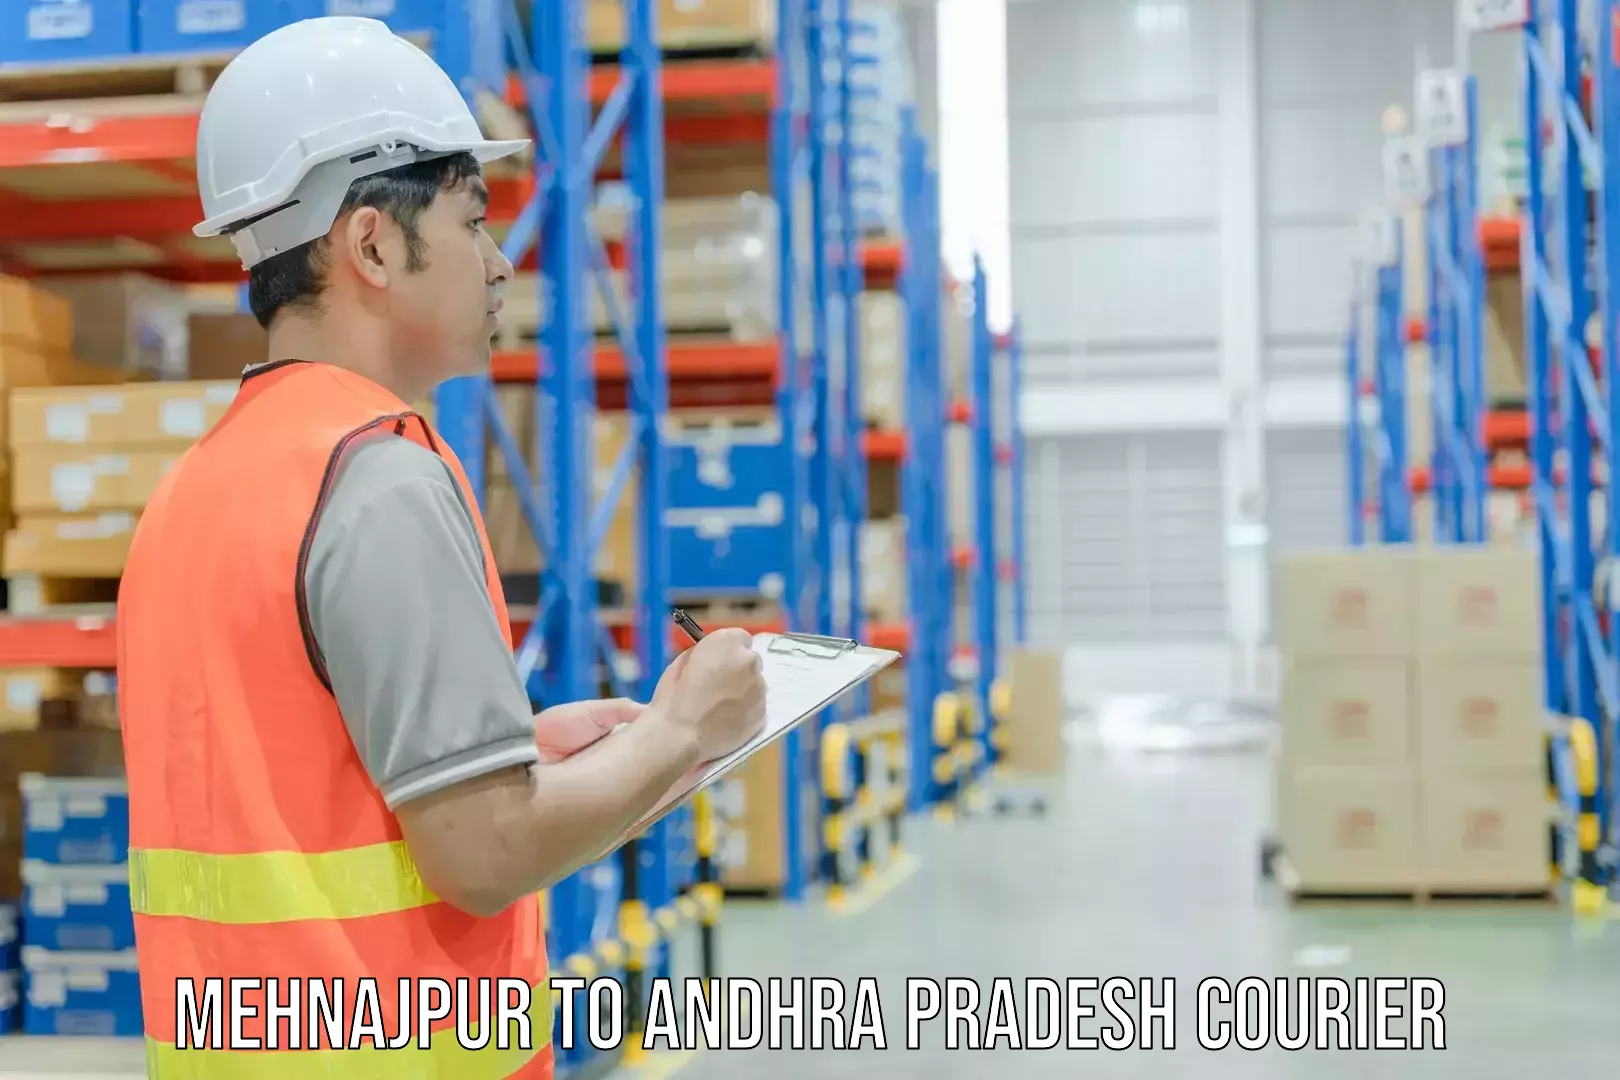 Full-service courier options Mehnajpur to Andhra Pradesh